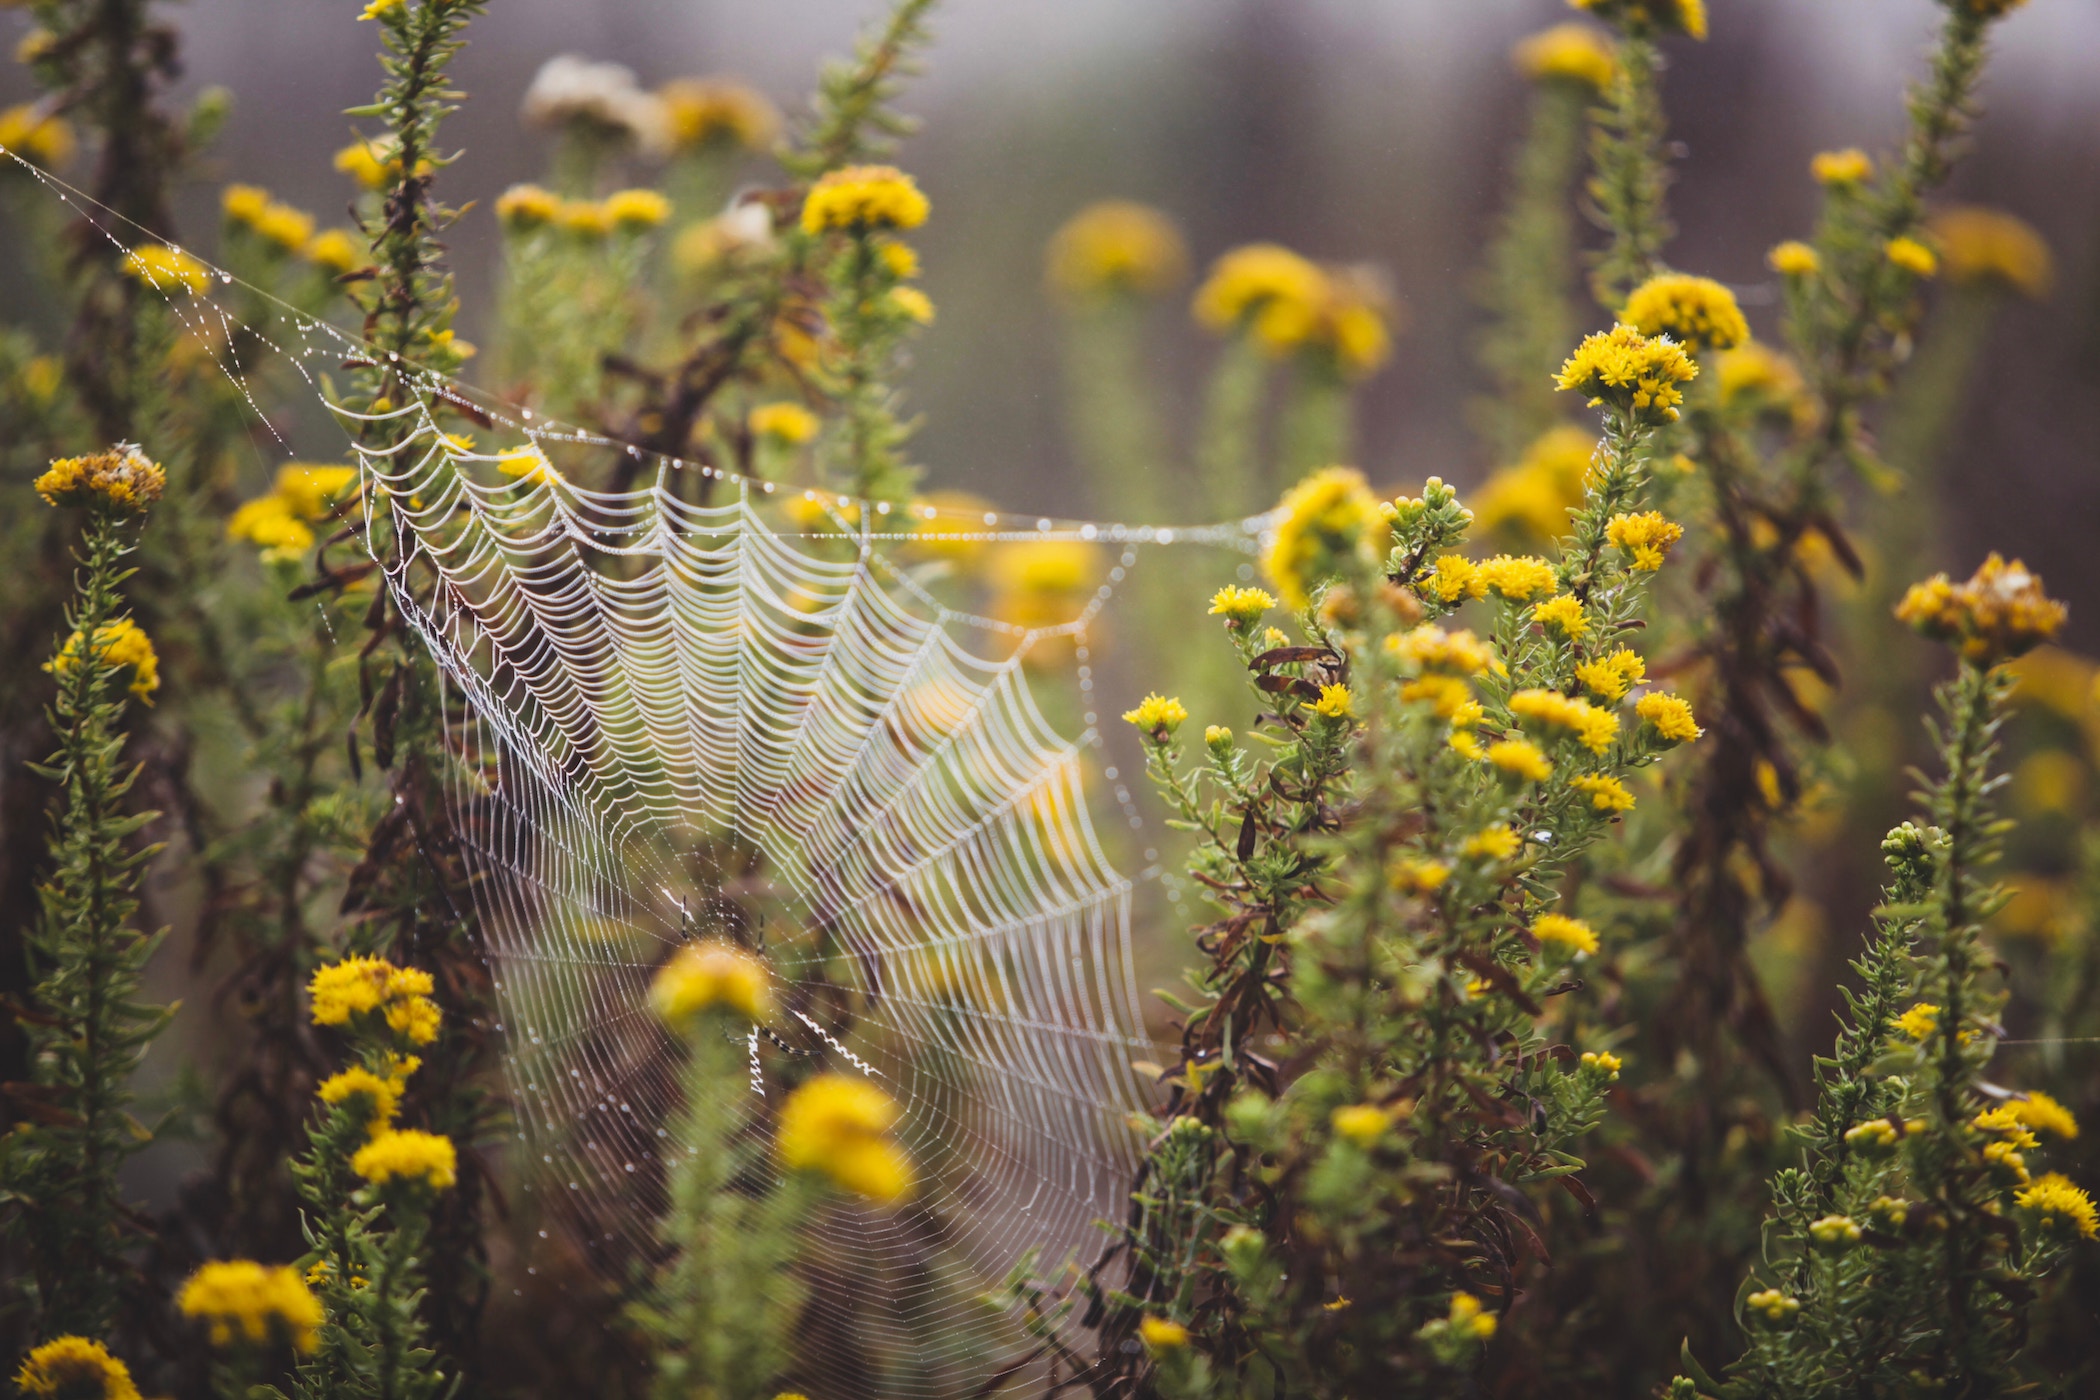 Flowers with a spider's web